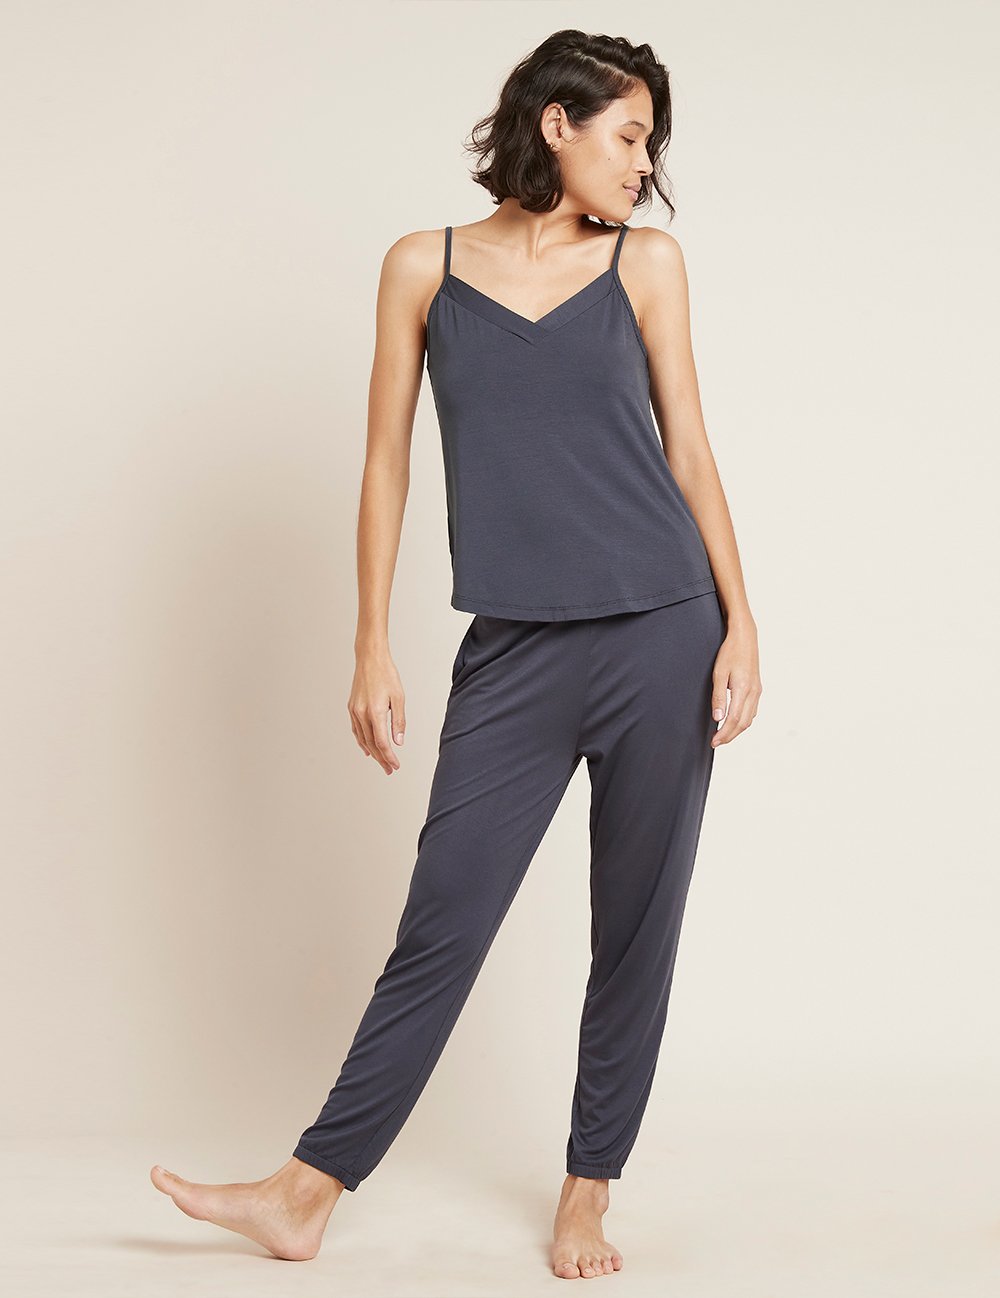 Boody Downtime Lounge Pant - Storm